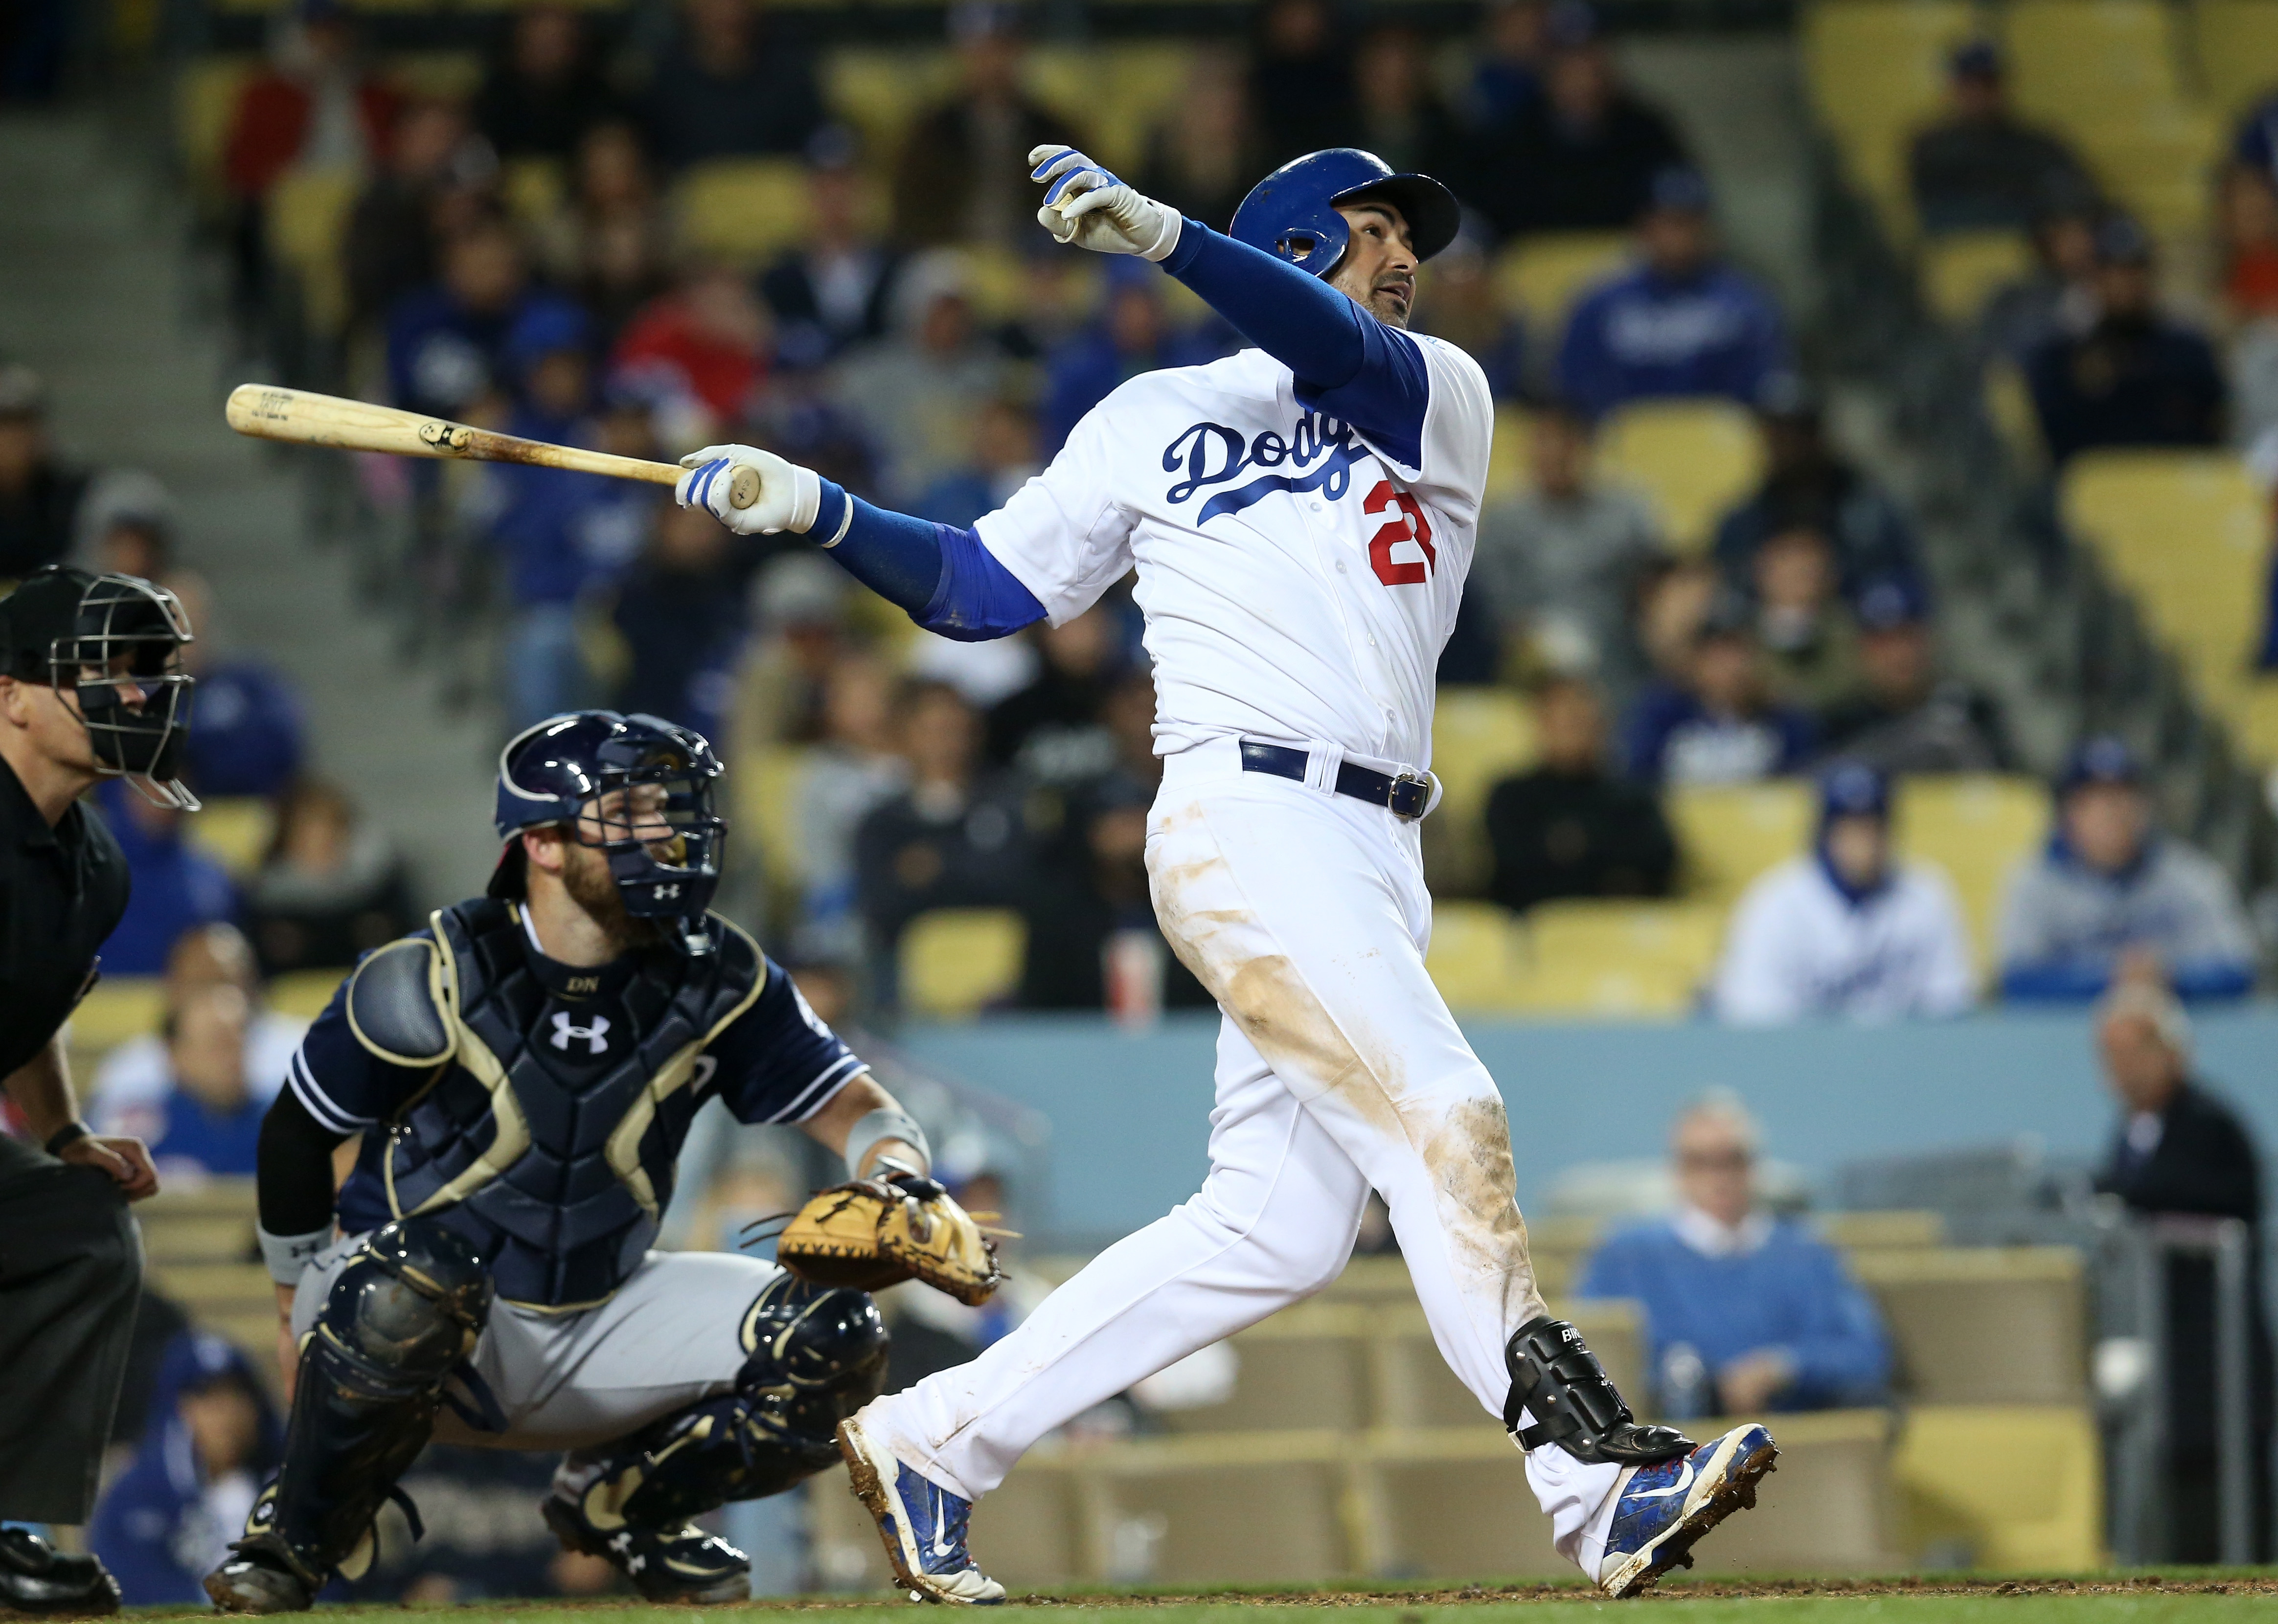 How to Watch Padres vs. Dodgers Live Stream Online